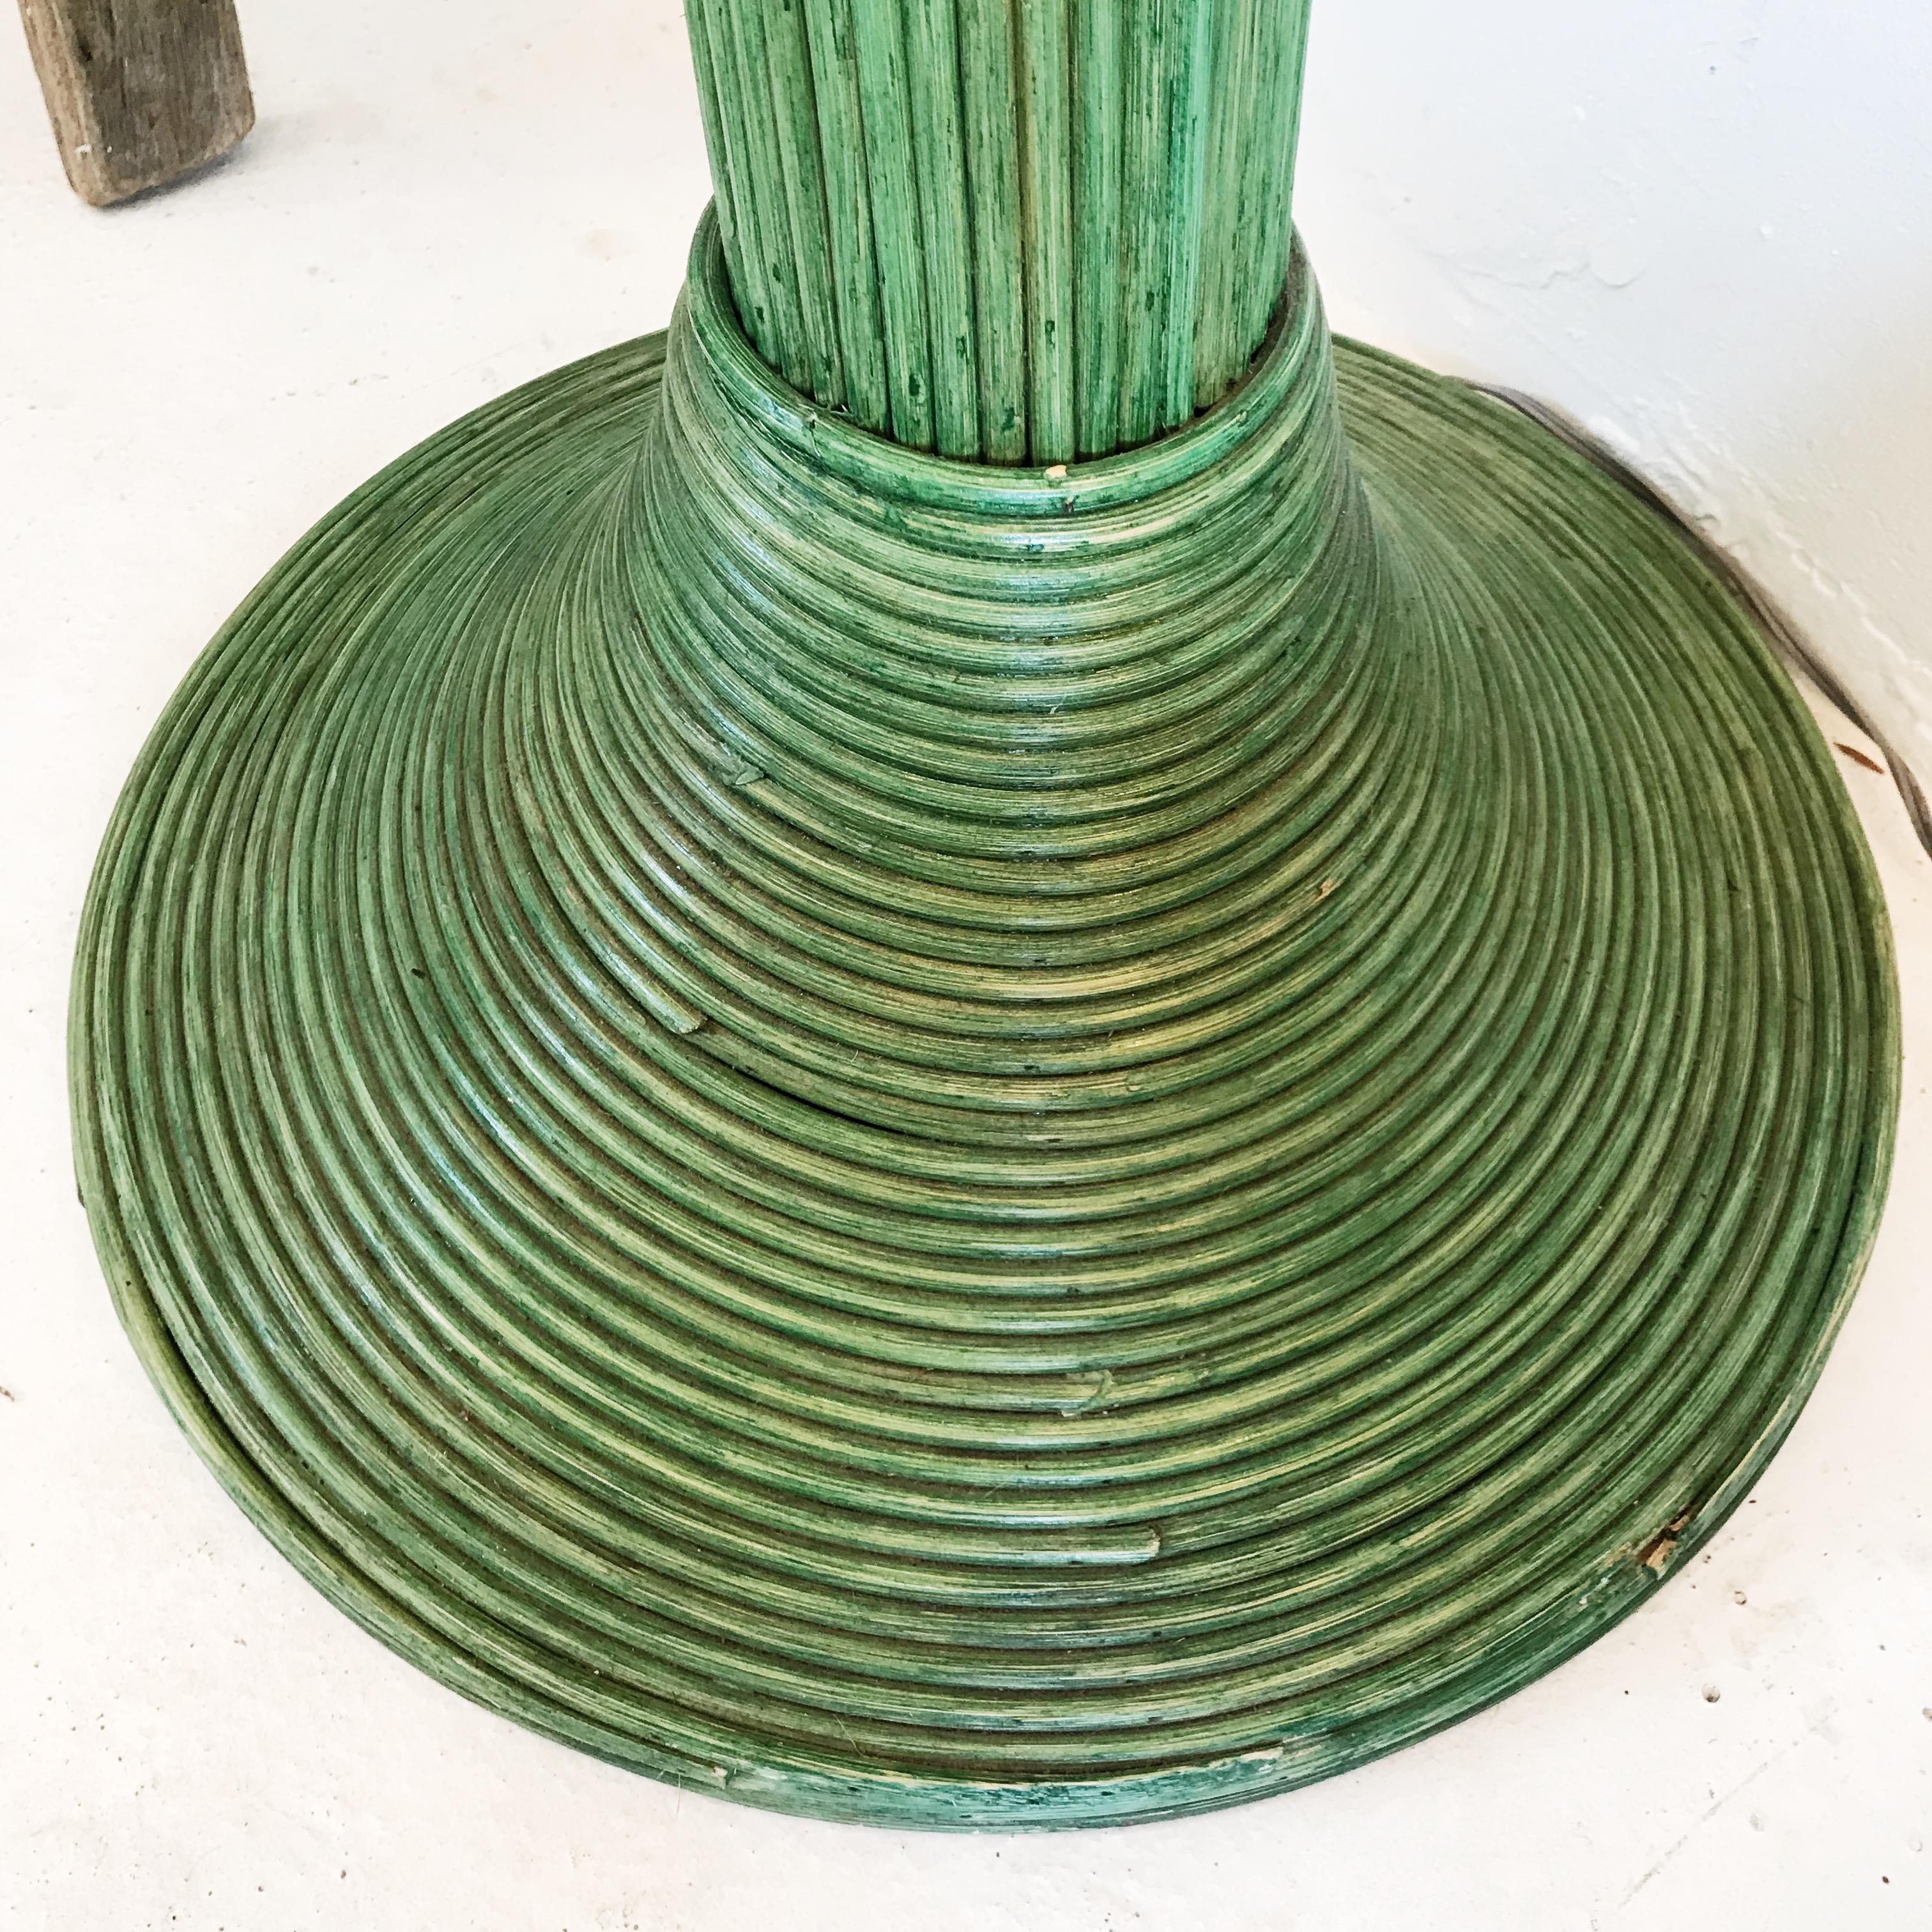 Late 20th Century Mexican Wicker Rattan Palm Tree Floor Lamp by Mario Lopez Torres in Jade For Sale